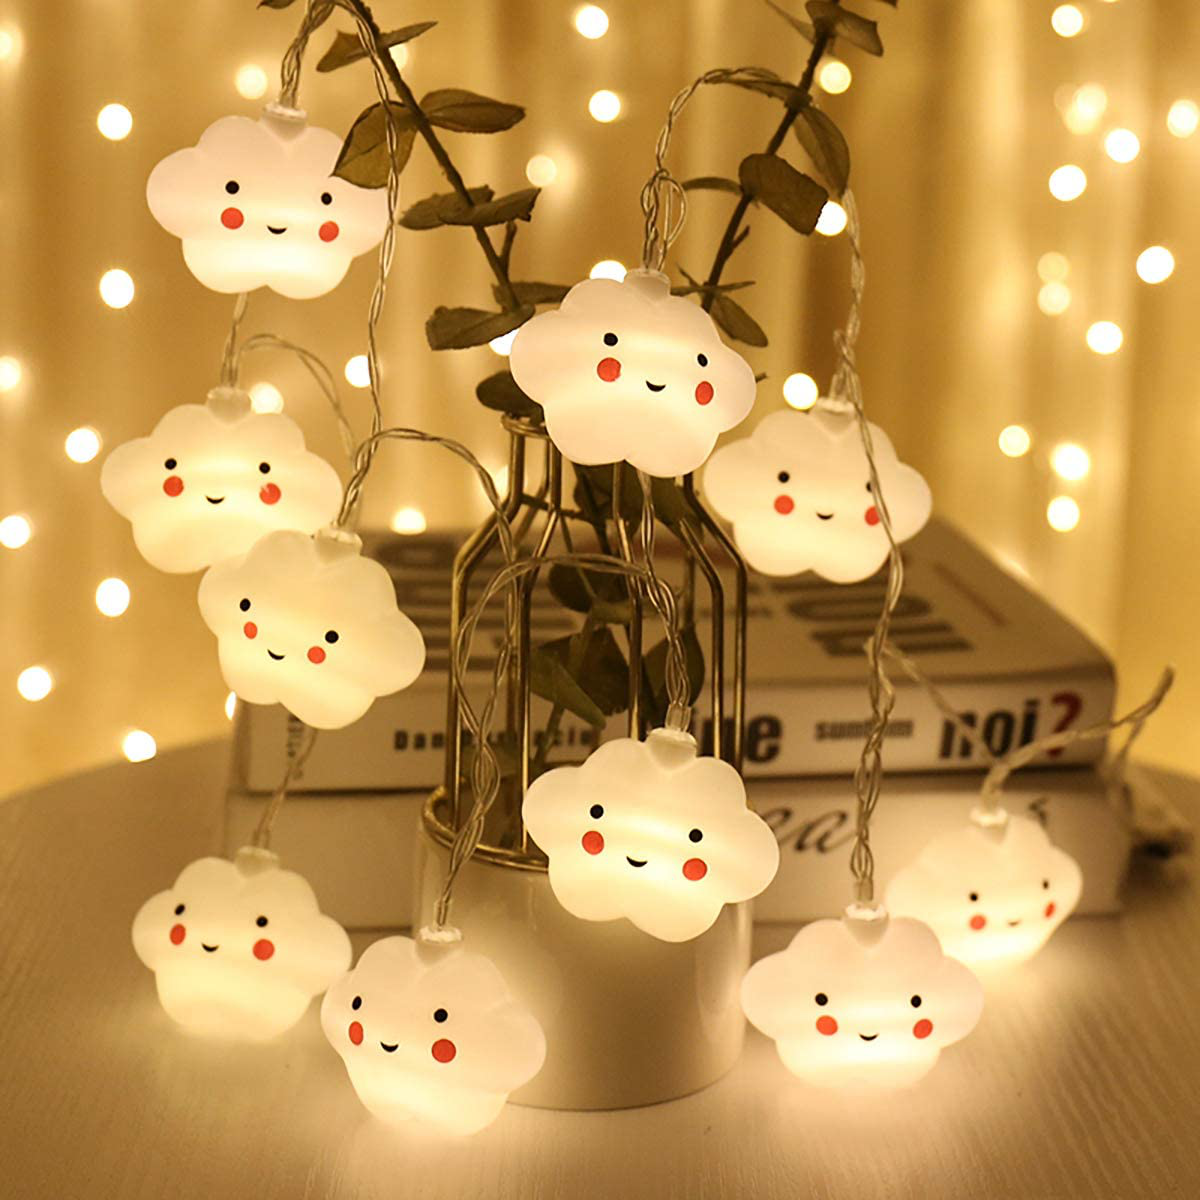 Indoor String Lights, Battery Powered Fairy String Lights Waterproof, 20 LED Cute Decoration Extendable for Indoor, Outdoor, Kids Bedroom, Christmas Tree, New Year, Garden Decoration, Warm White